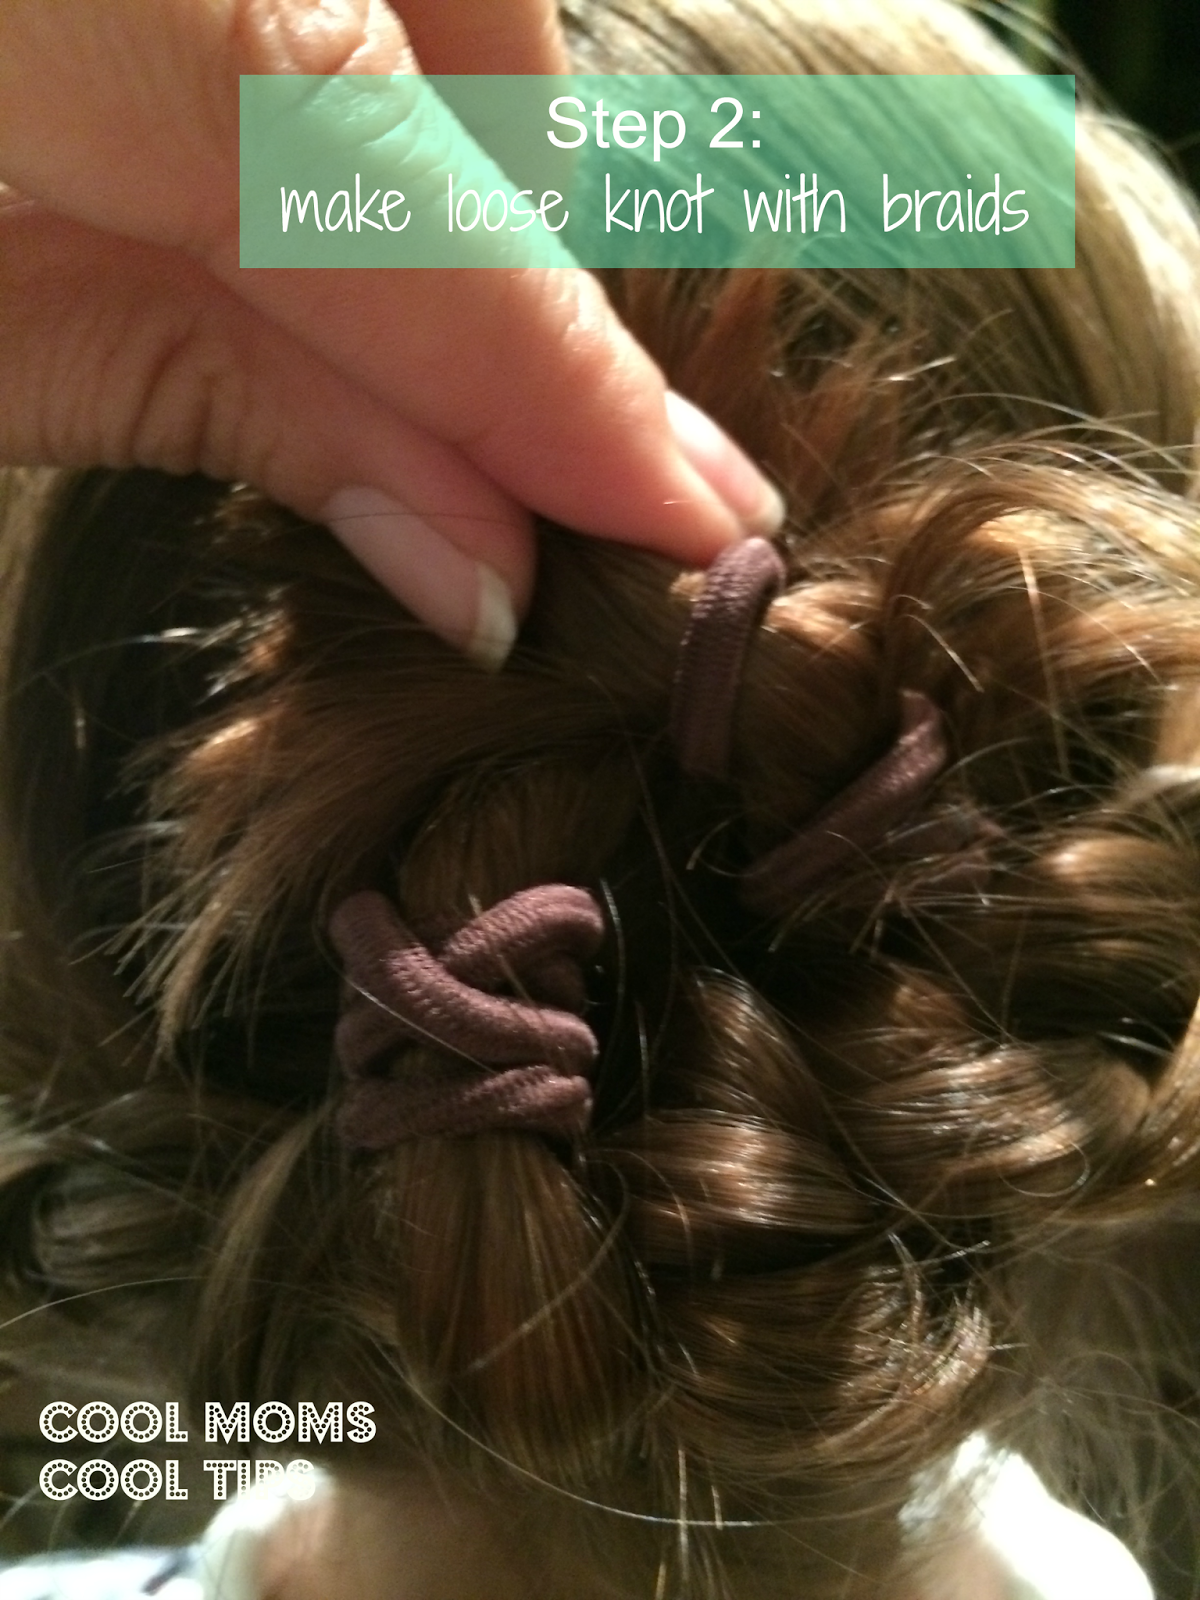 cool moms cool tips No More Tangles Holiday Styles for Girls step 2